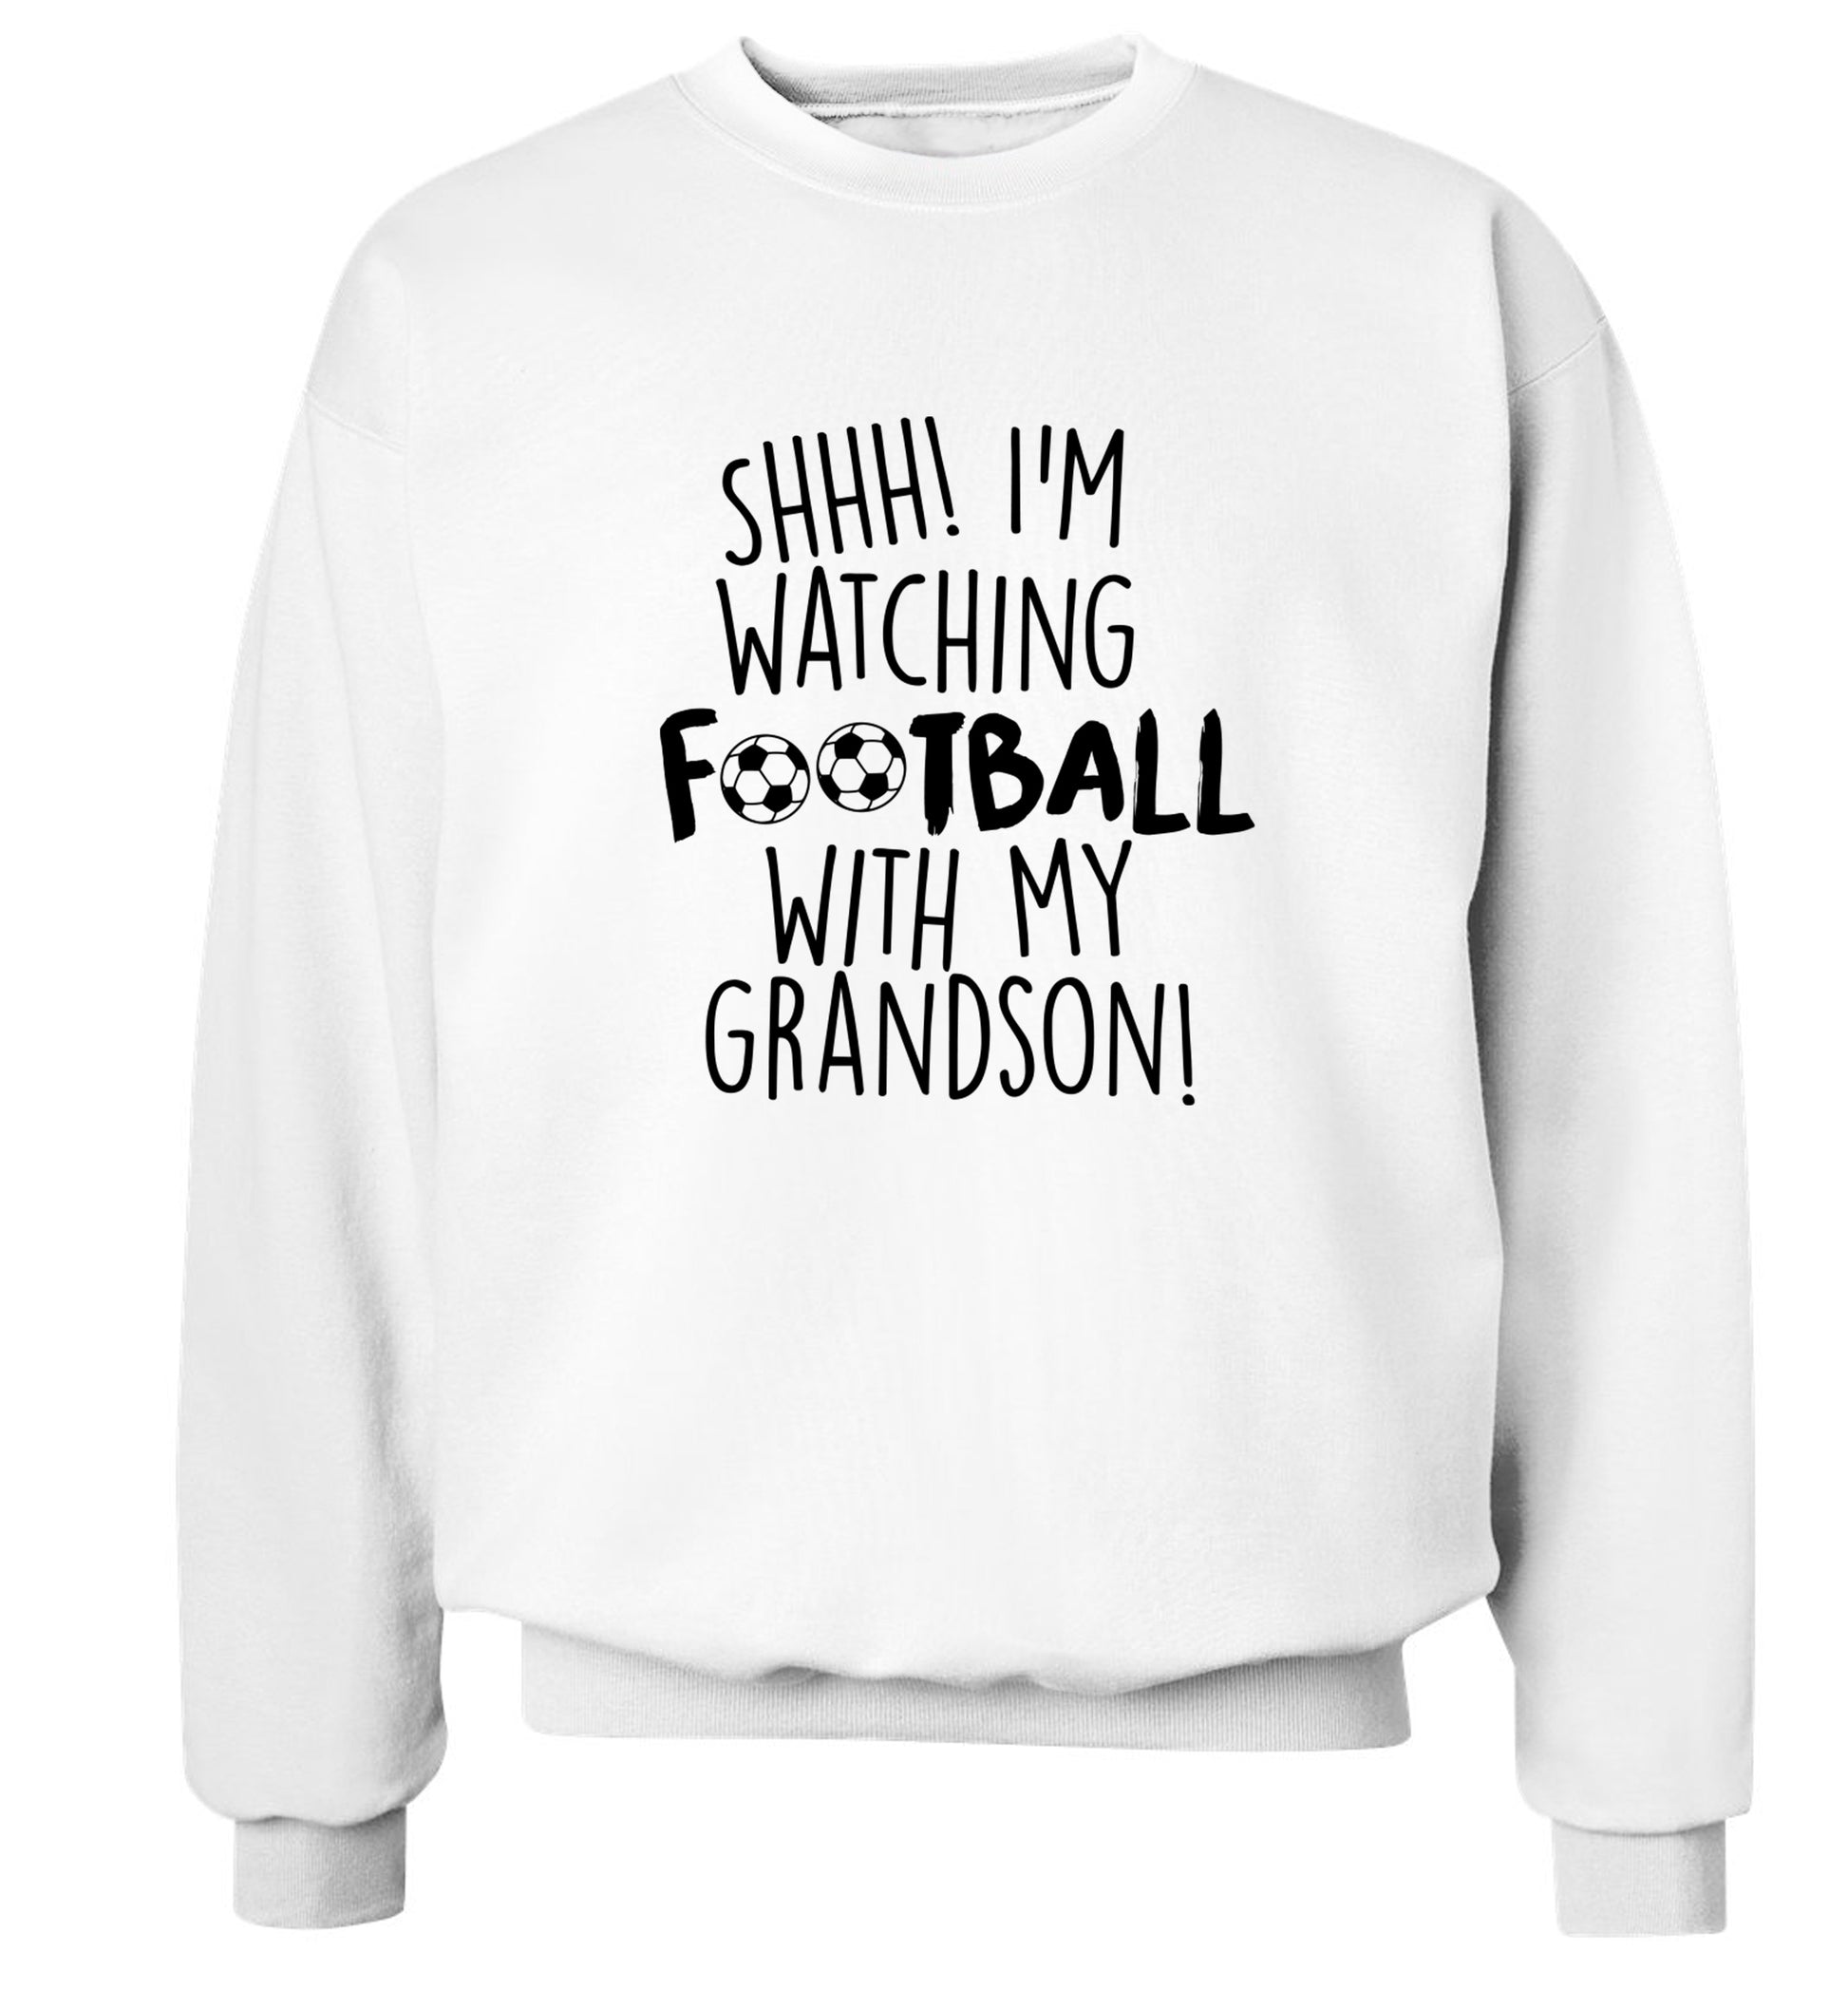 Shhh I'm watching football with my grandson Adult's unisexwhite Sweater 2XL